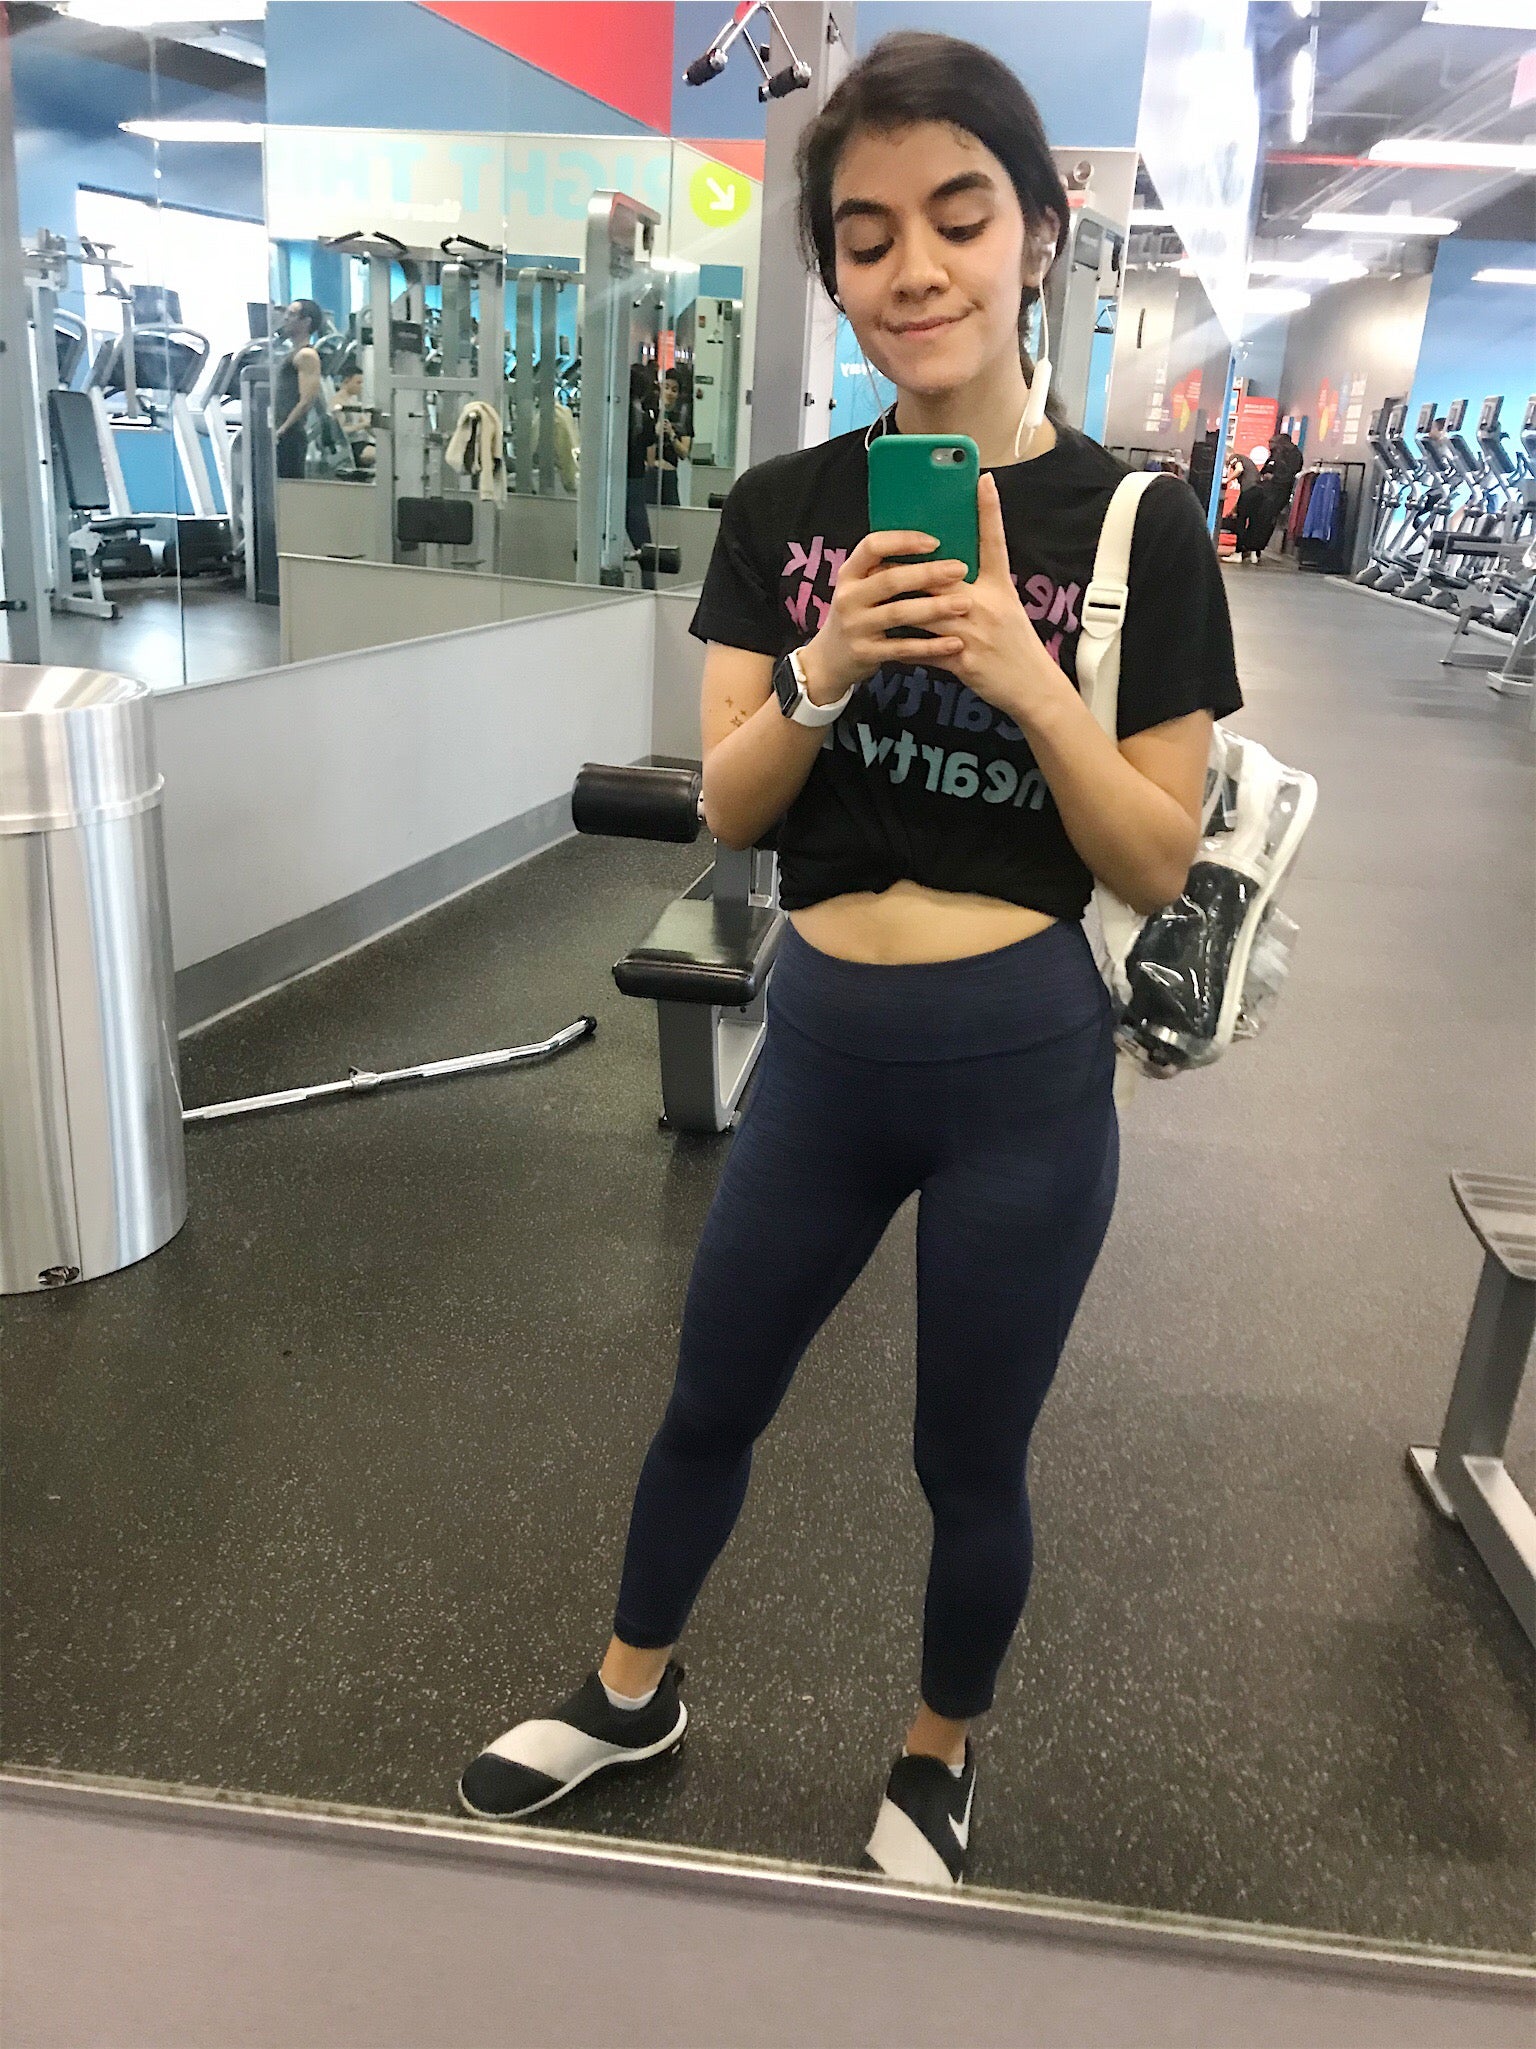 Fabletics Leggings Review. I love these leggings! I know if I'm